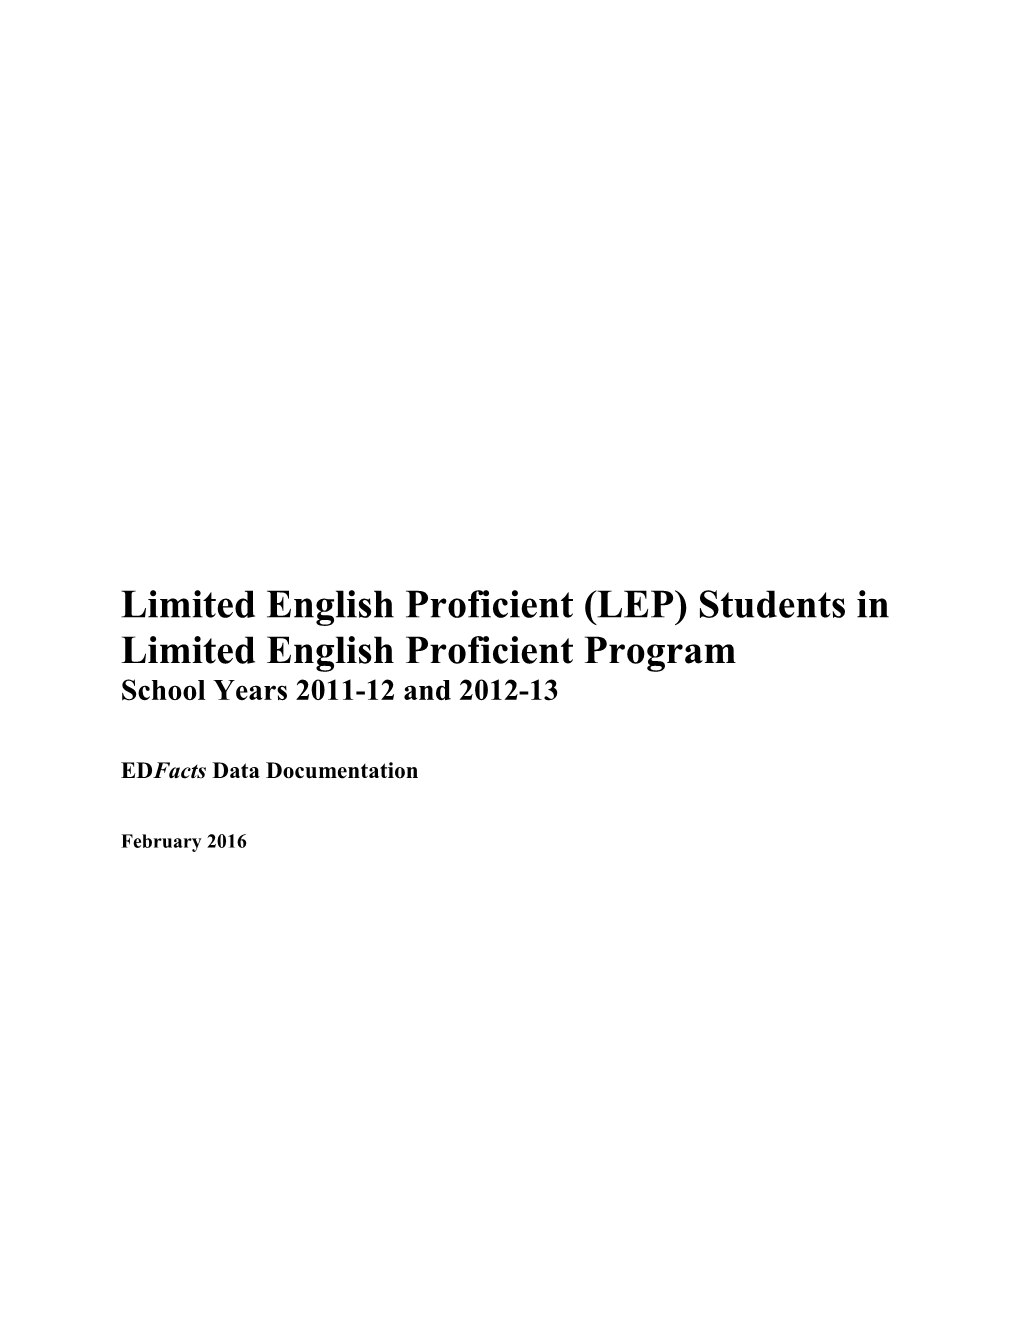 Limited English Proficient (LEP) Students in Limited English Proficientprogram